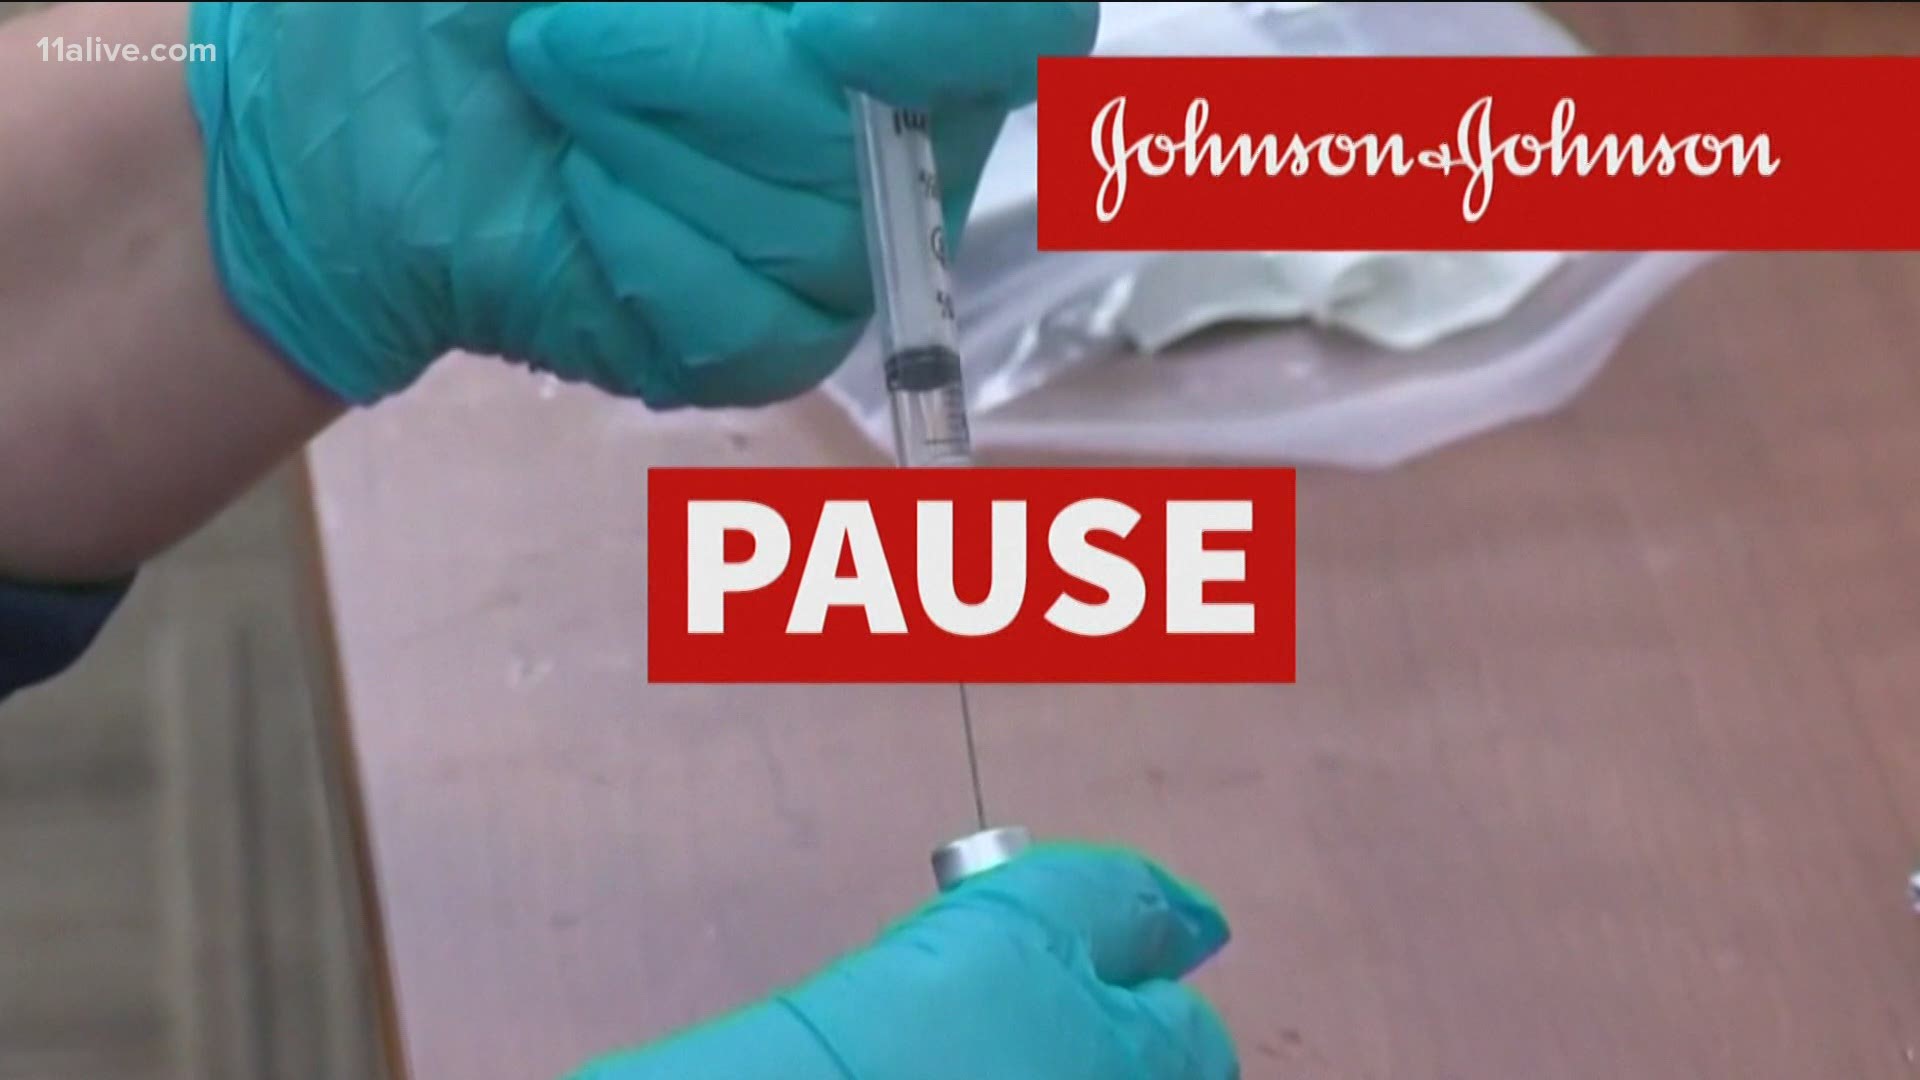 Some are concerned the pausing of the Johnson & Johnson vaccine may turn people away from getting vaccinated against COVID